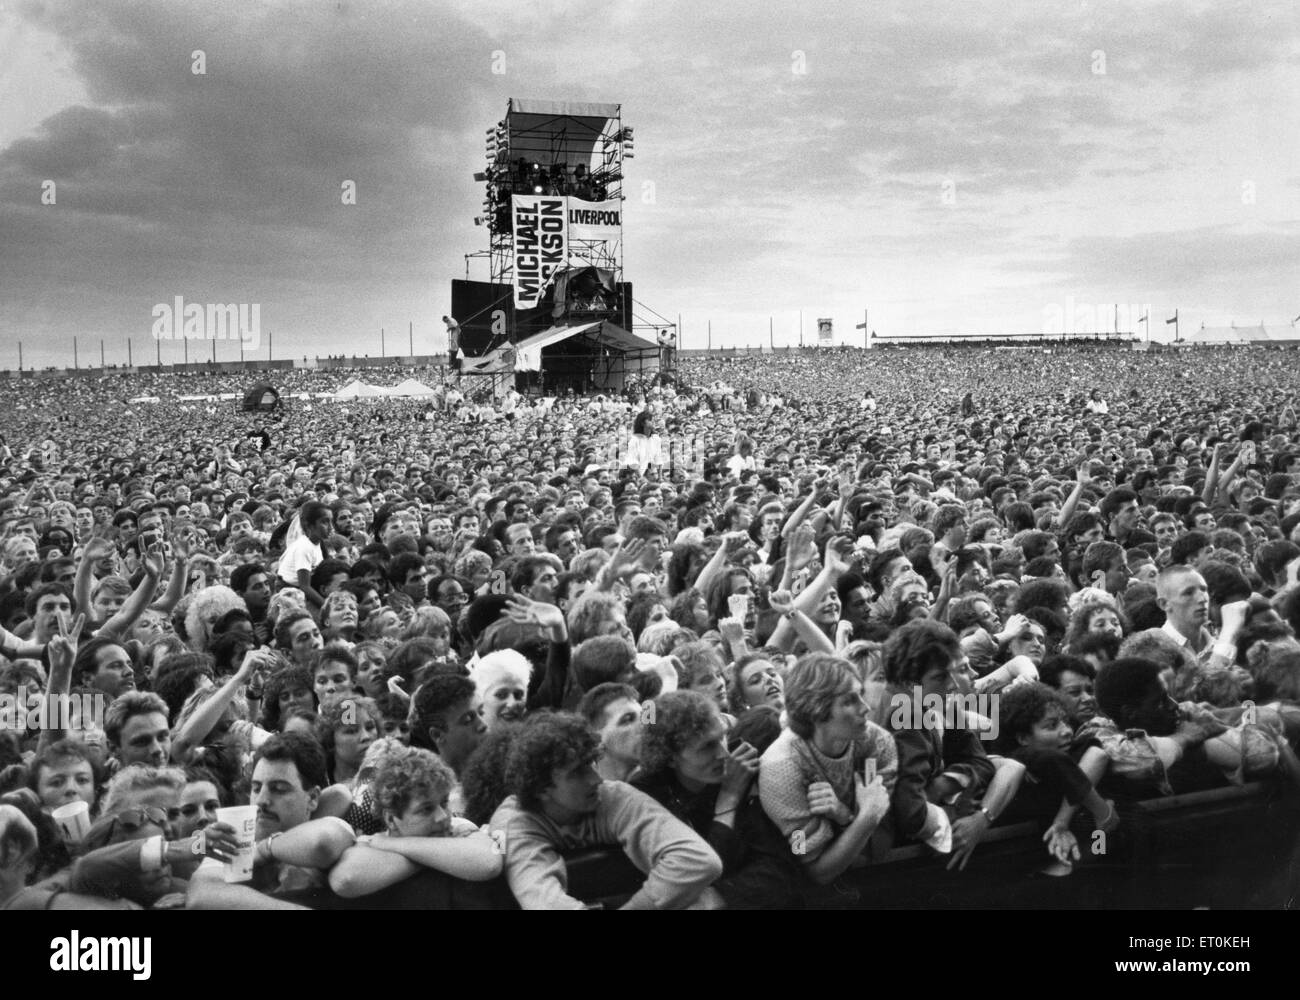 crowds-gather-at-the-michael-jackson-concert-at-aintree-11th-september-ET0KEH.jpg